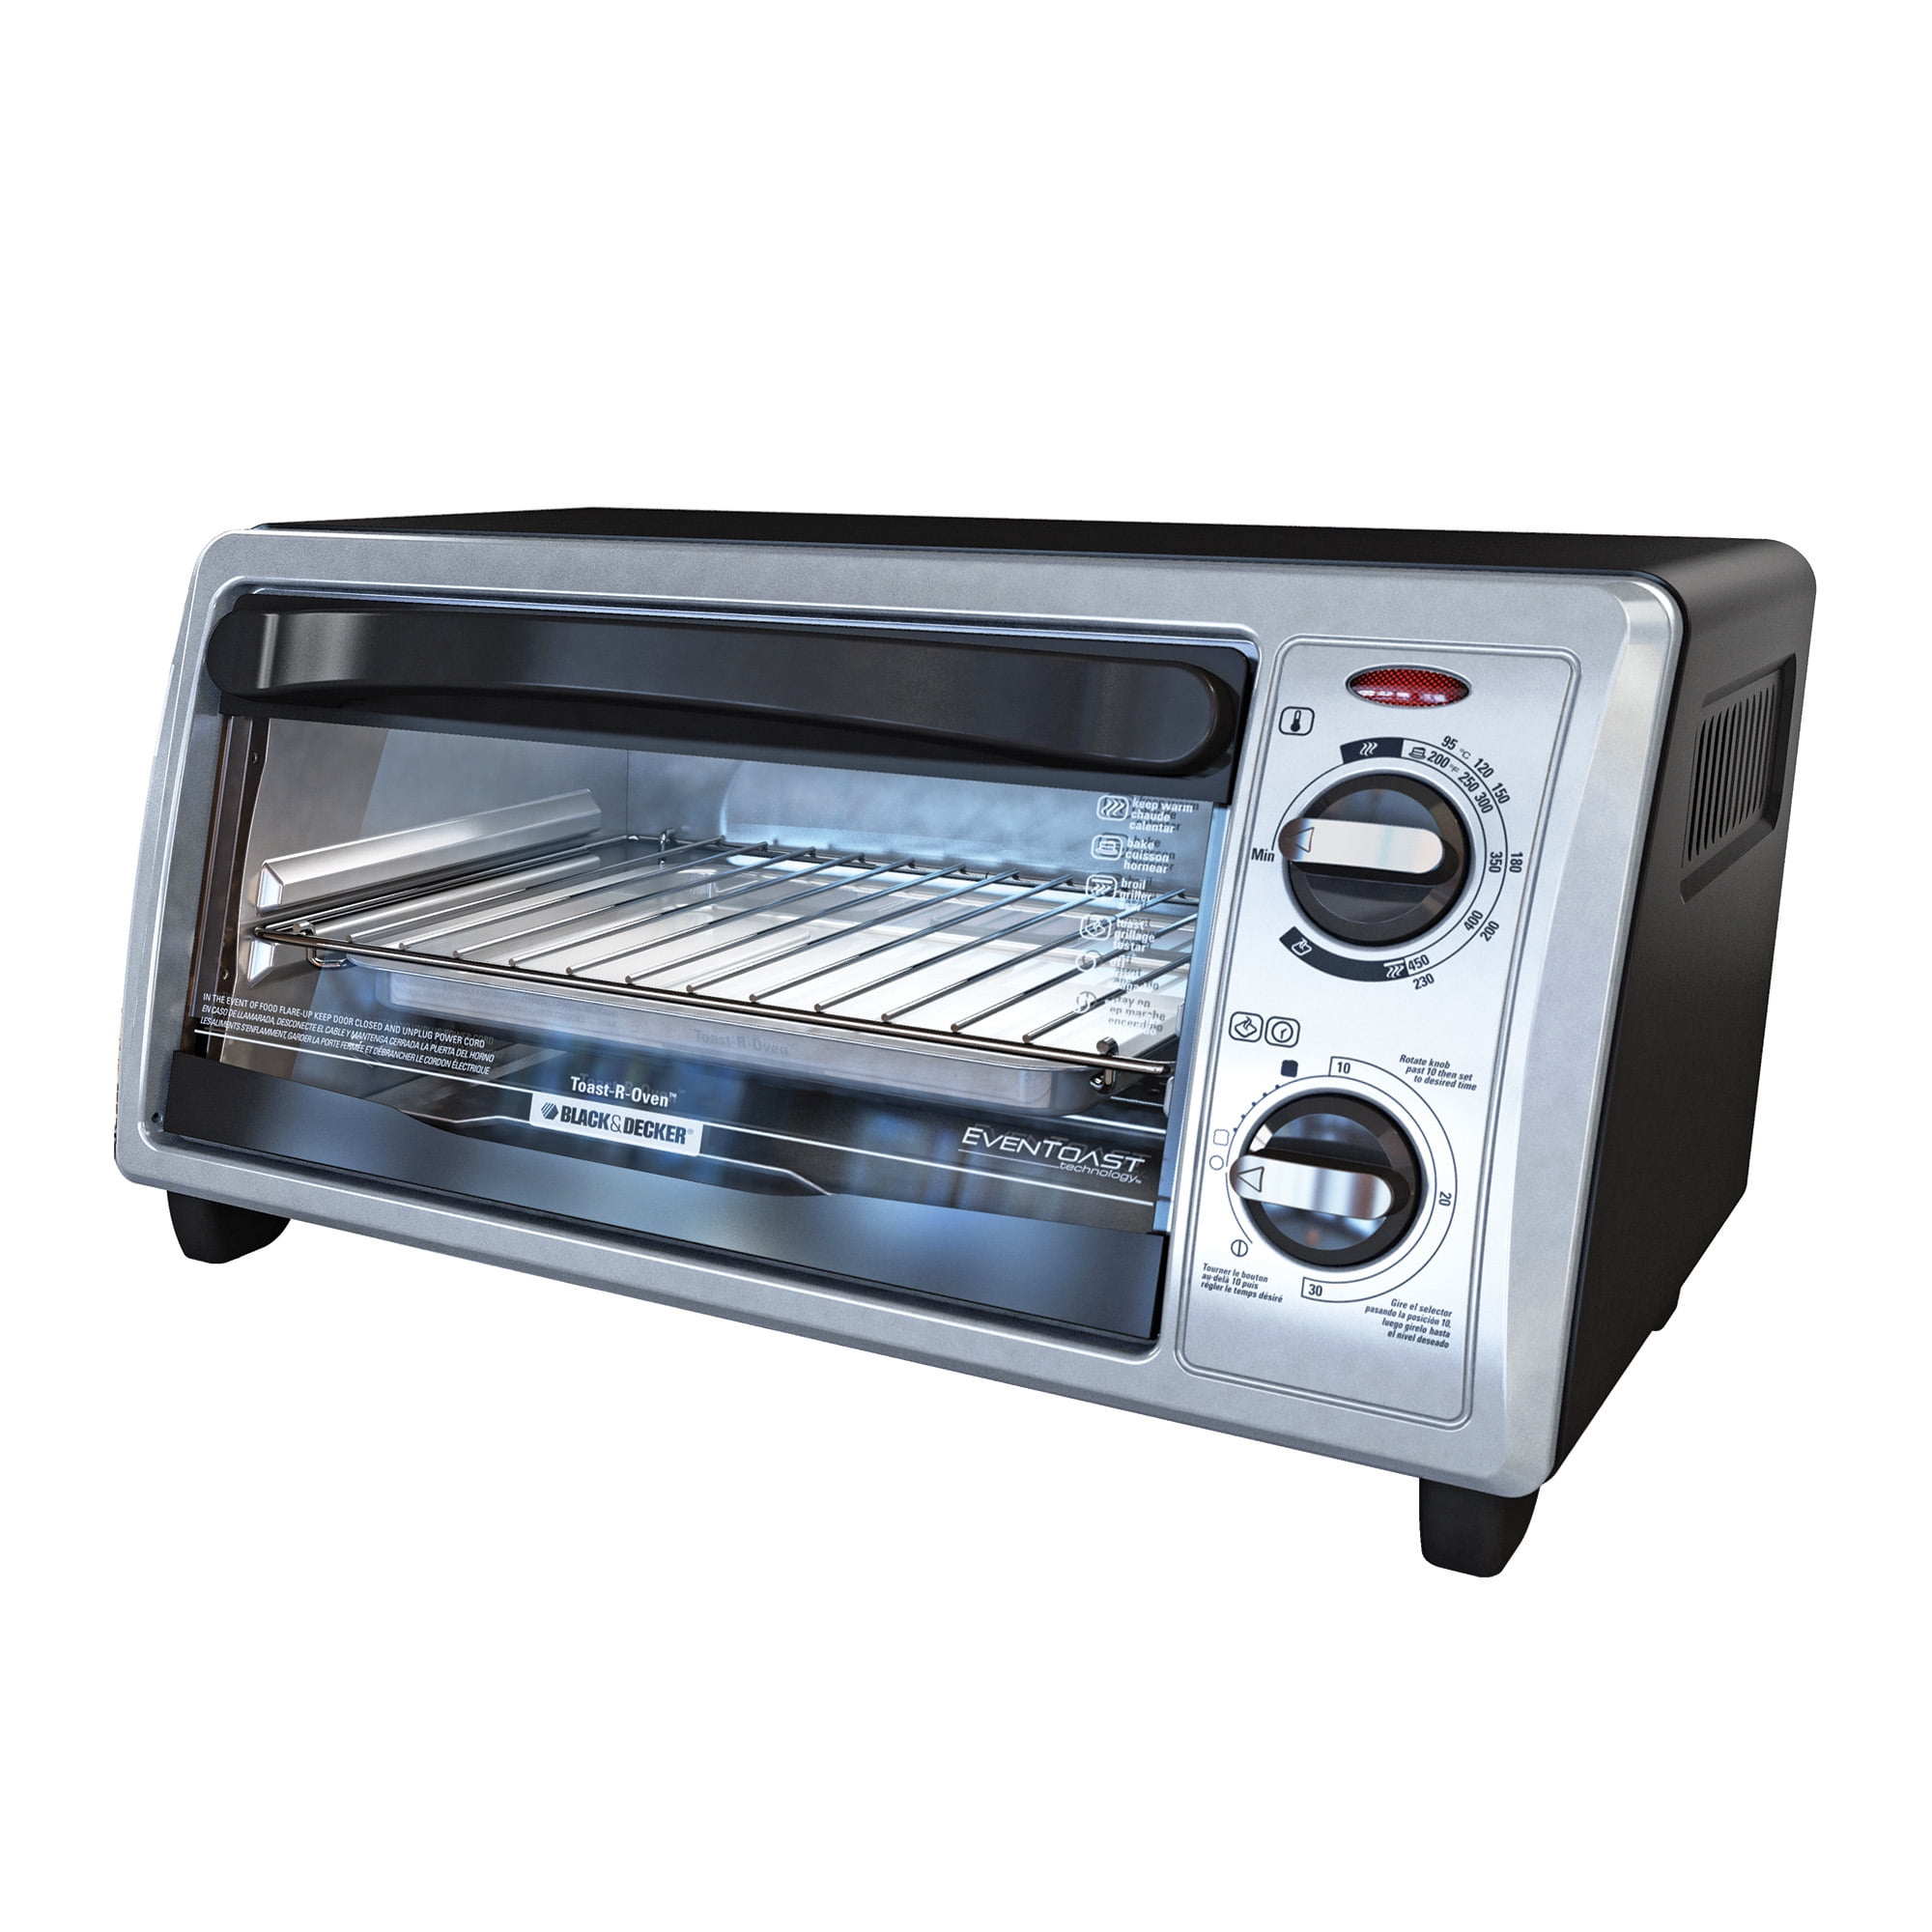 Black Decker 4 Slice Toaster Oven Even Toaster T01332sbd New 